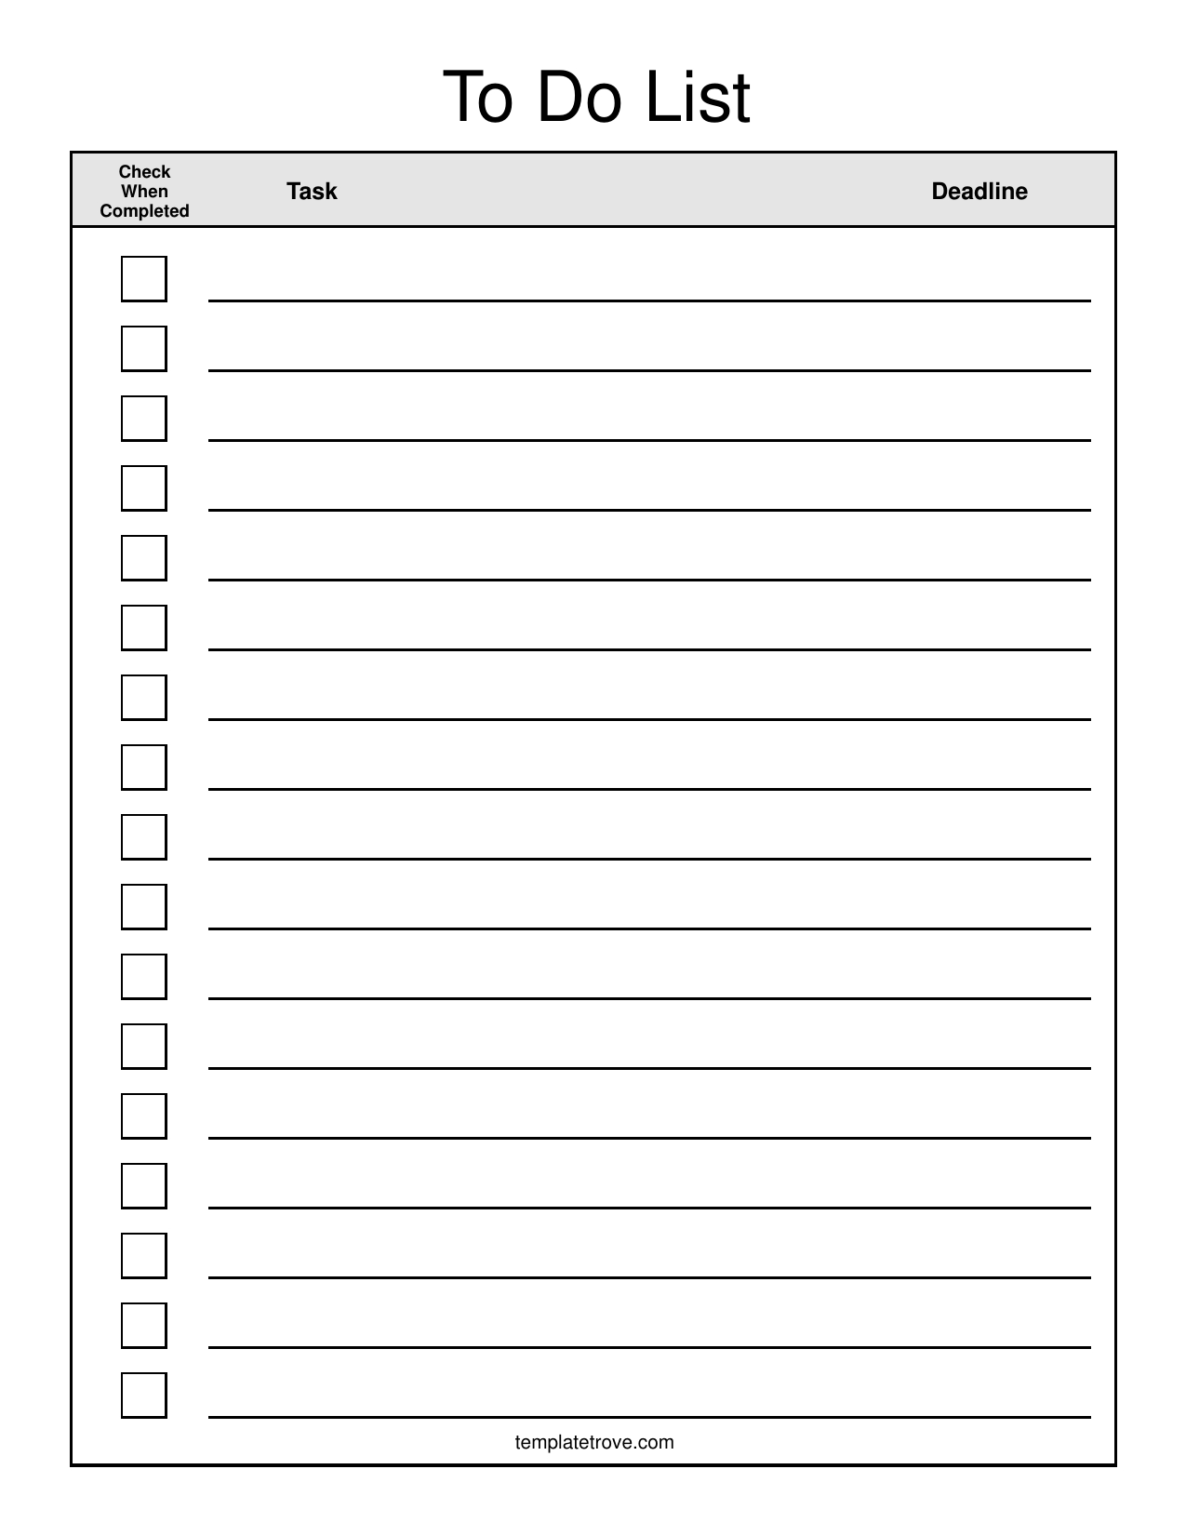 download-to-do-checklist-template-excel-pdf-rtf-word-for-blank-checklist-template-pdf